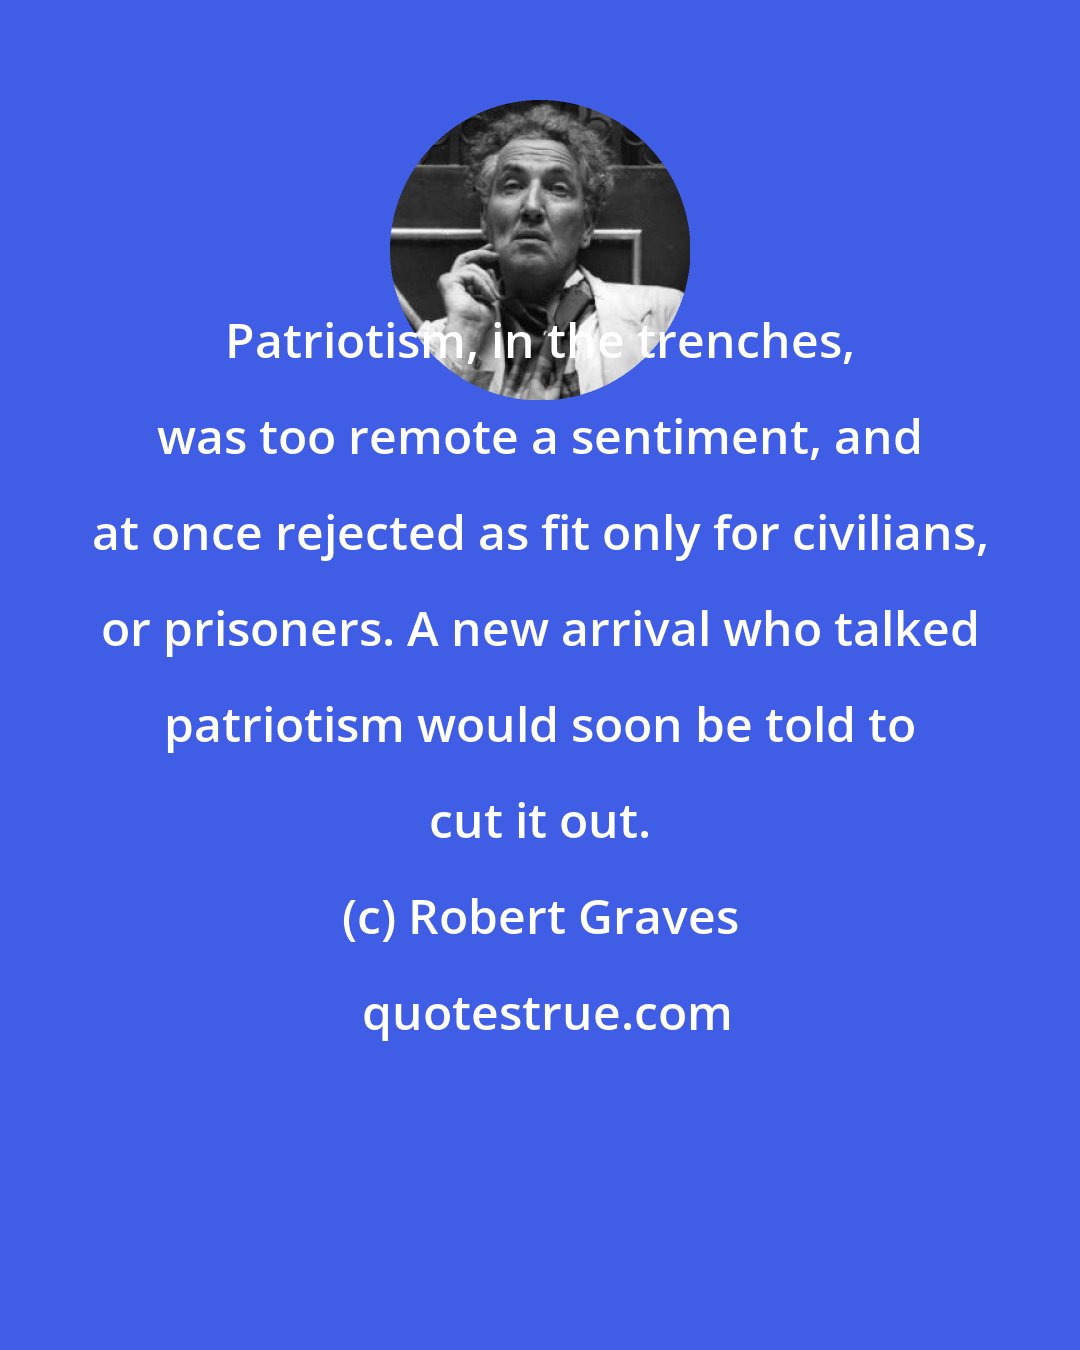 Robert Graves: Patriotism, in the trenches, was too remote a sentiment, and at once rejected as fit only for civilians, or prisoners. A new arrival who talked patriotism would soon be told to cut it out.